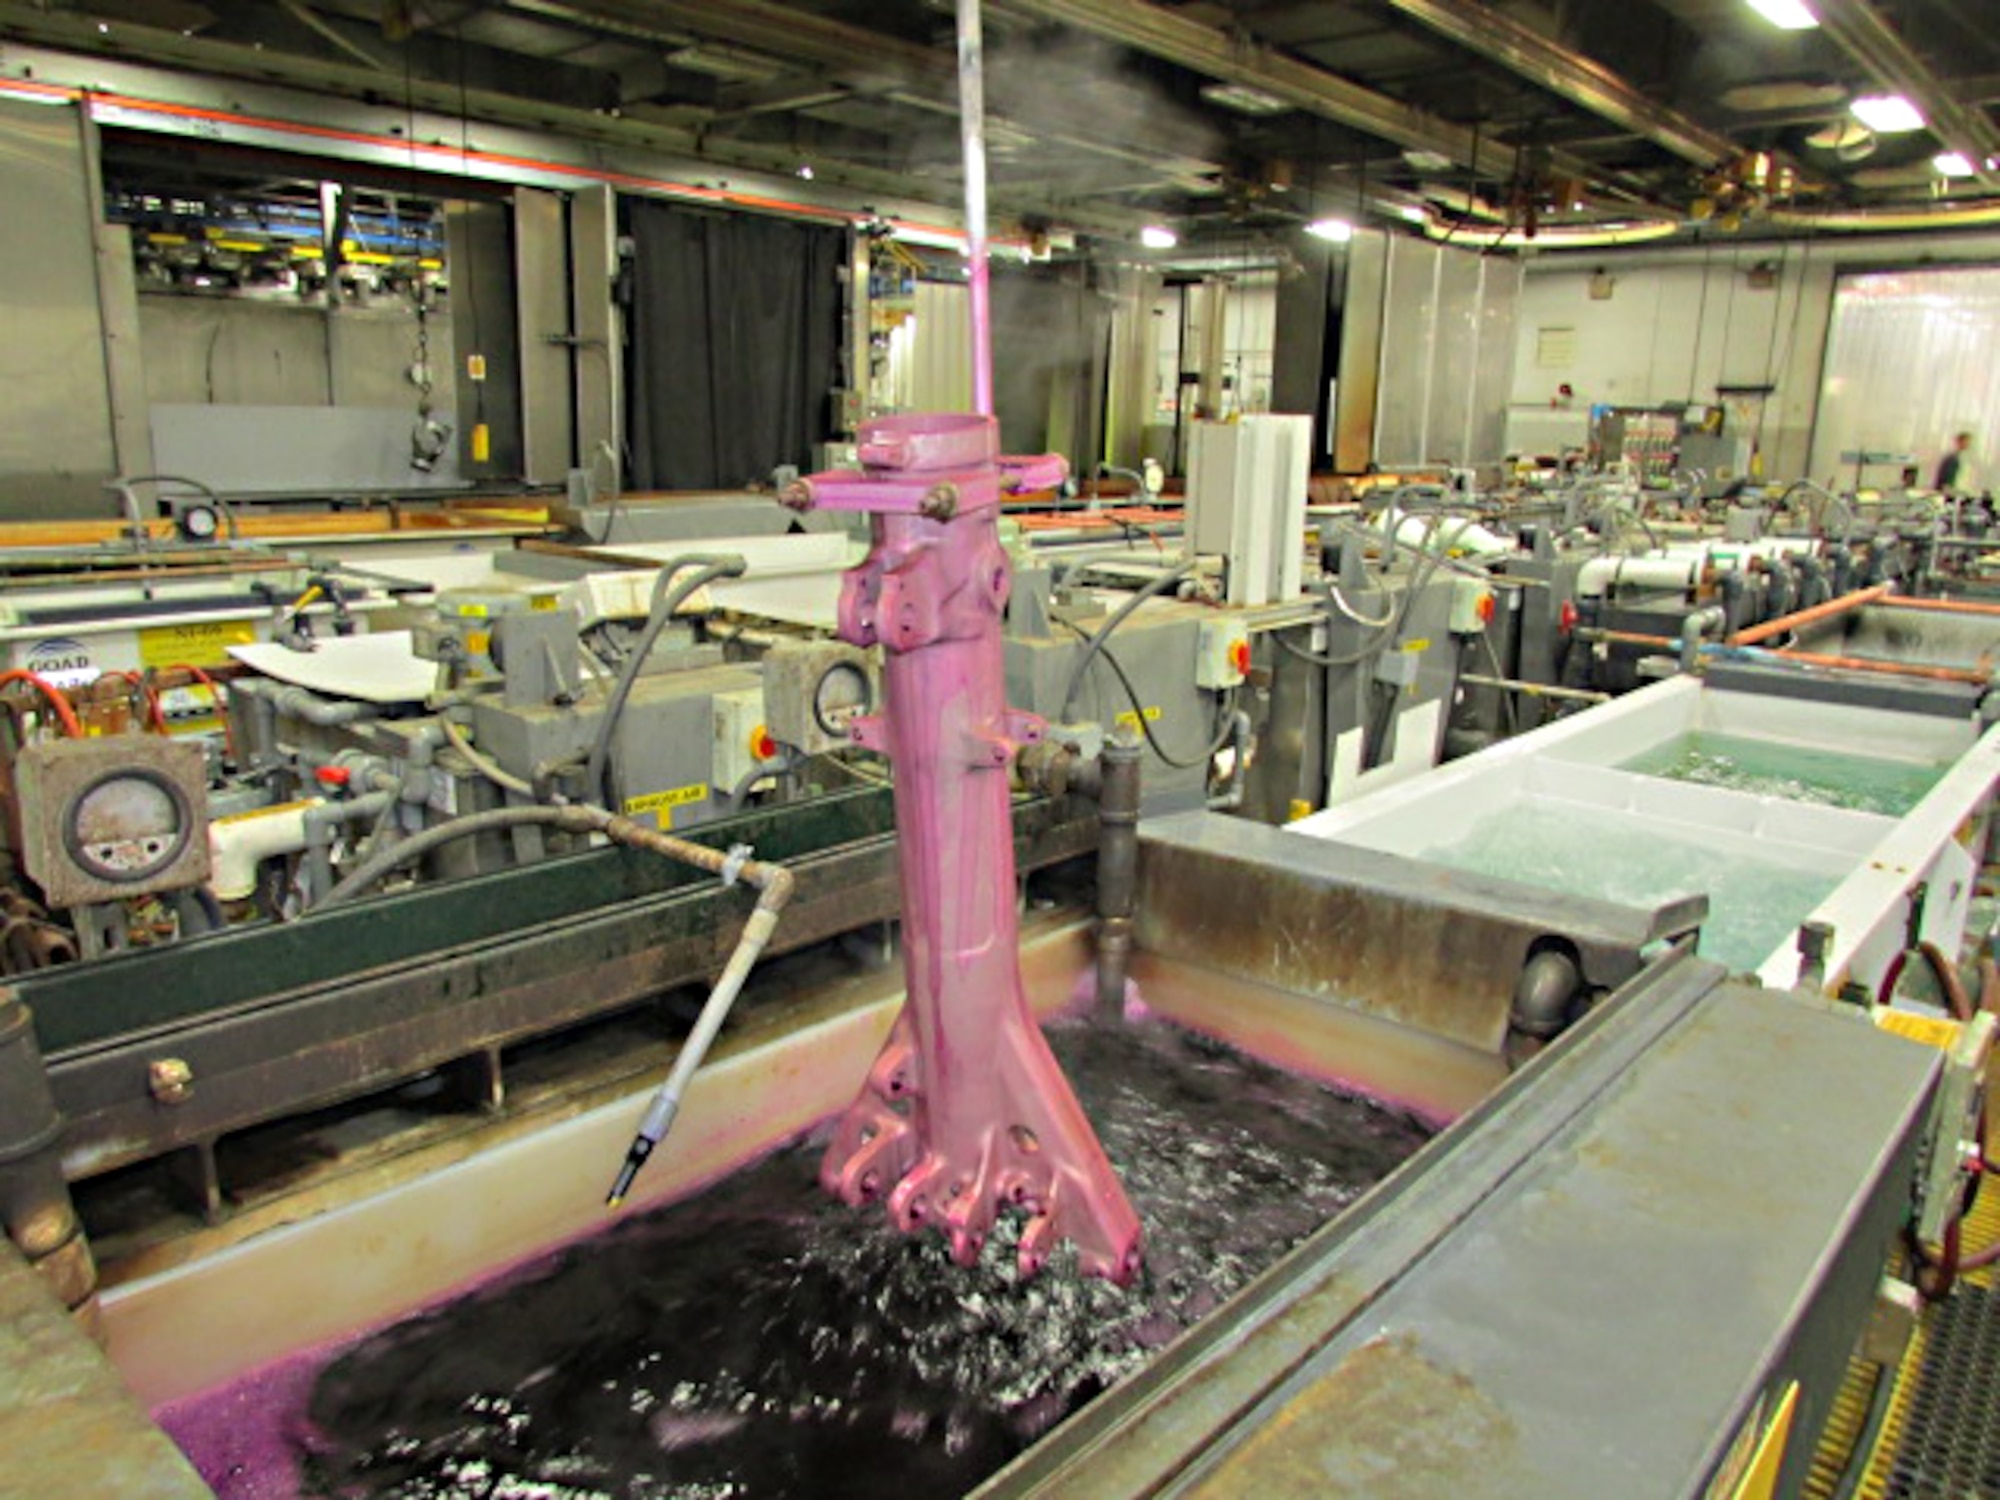 An F-15 outer piston is anodized and sealed with new potassium permanganate sealer at Ogden Air Logistics Complex.  AFRL researchers identified and tested this non-chromium sealer as a safer alternative to chromium-based products, and it is now fully incorporated into OO-ALC’s coating process. (U.S. Air Force Photo)